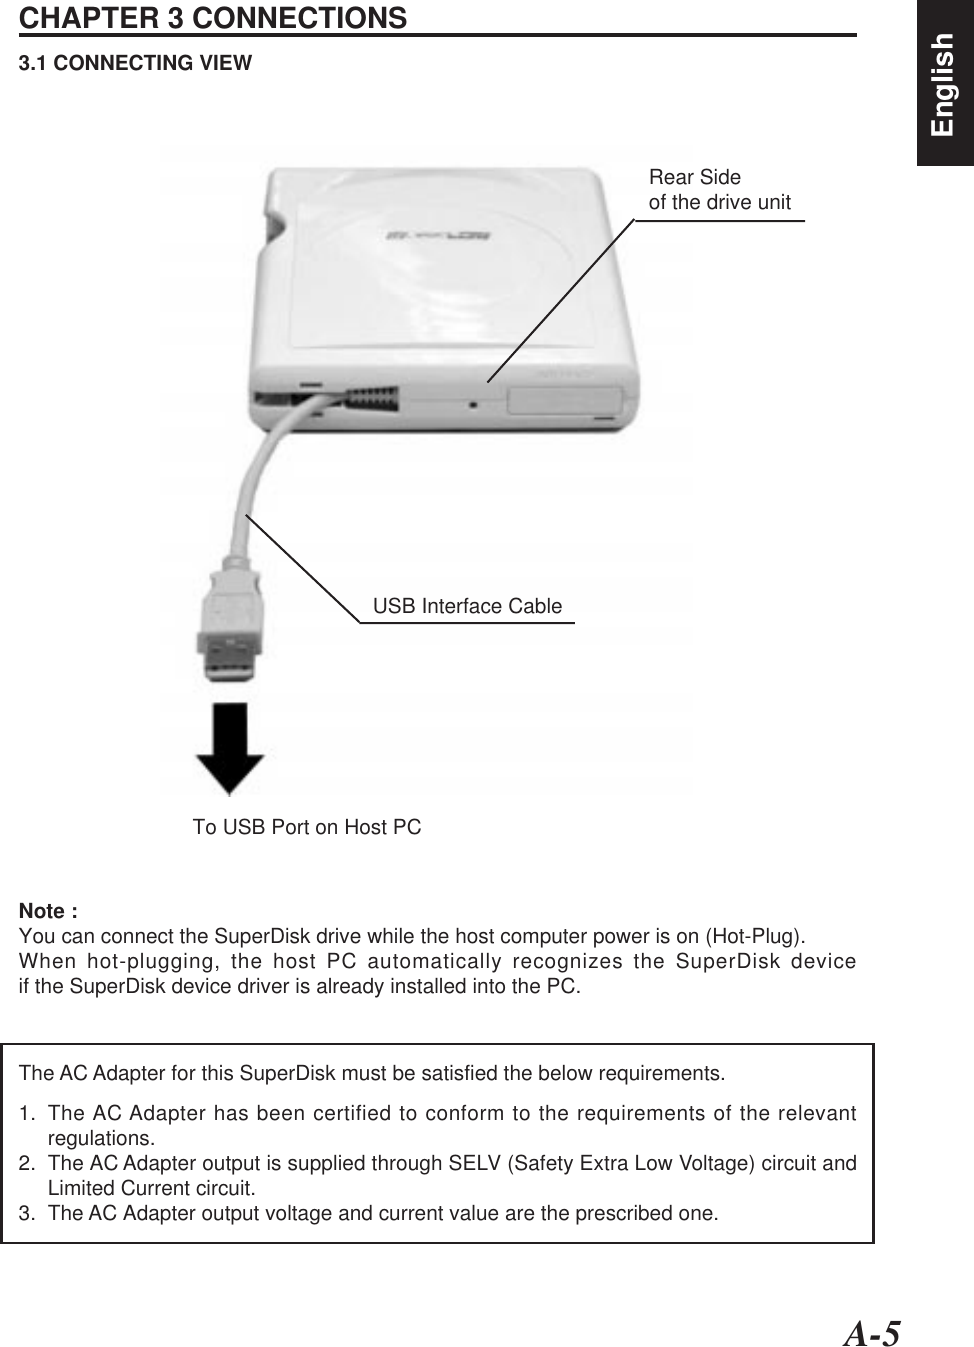 A-5EnglishCHAPTER 3 CONNECTIONS3.1 CONNECTING VIEWTo USB Port on Host PCUSB Interface CableNote :You can connect the SuperDisk drive while the host computer power is on (Hot-Plug).When hot-plugging, the host PC automatically recognizes the SuperDisk deviceif the SuperDisk device driver is already installed into the PC.Rear Sideof the drive unitThe AC Adapter for this SuperDisk must be satisfied the below requirements.1. The AC Adapter has been certified to conform to the requirements of the relevantregulations.2. The AC Adapter output is supplied through SELV (Safety Extra Low Voltage) circuit andLimited Current circuit.3. The AC Adapter output voltage and current value are the prescribed one.